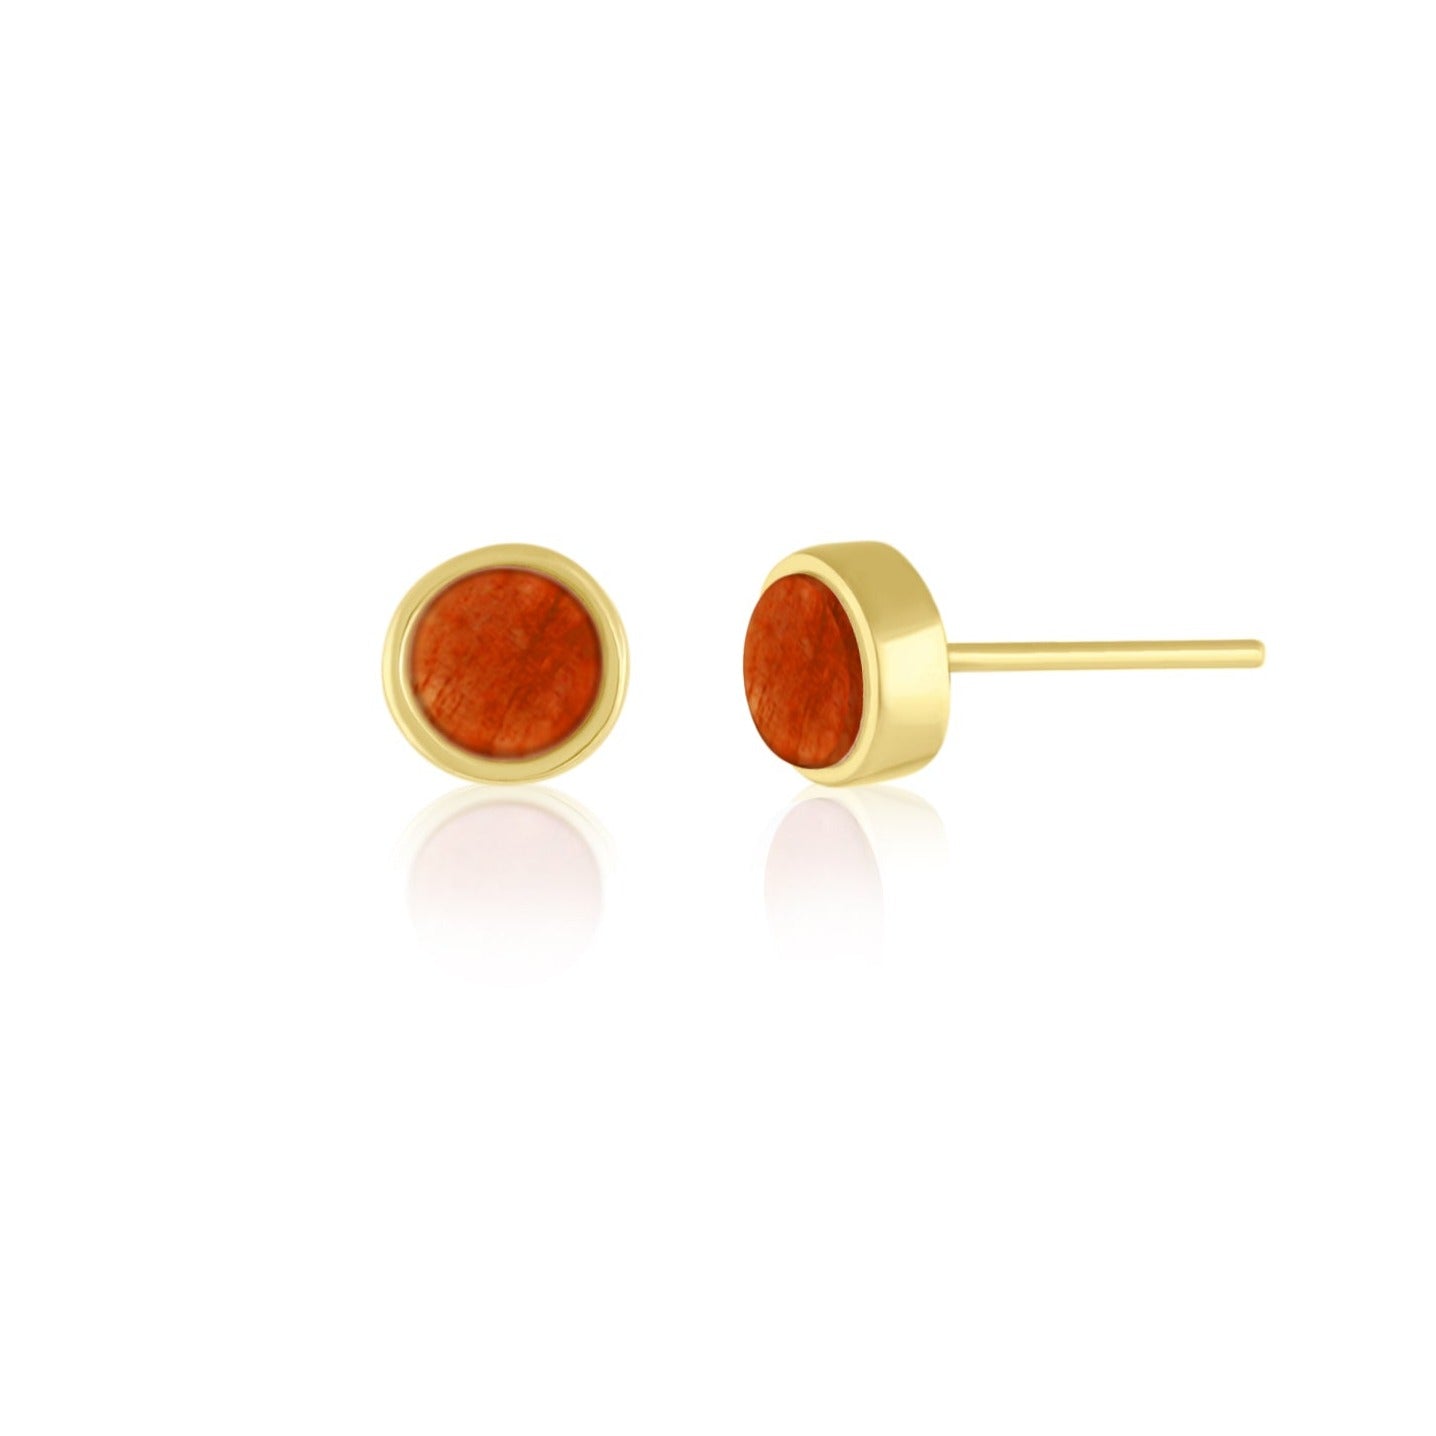 5mm Round Stud Yellow Gold Plated Earrings in Orange Dyed Feldspar Natural Gemstone Made by Born to Rock Jewelry Based in San Diego California5mm Round Stud Yellow Gold Plated Earrings in Orange Dyed Feldspar Natural Gemstone Made by Born to Rock. Online Jewelry Based in San Diego California